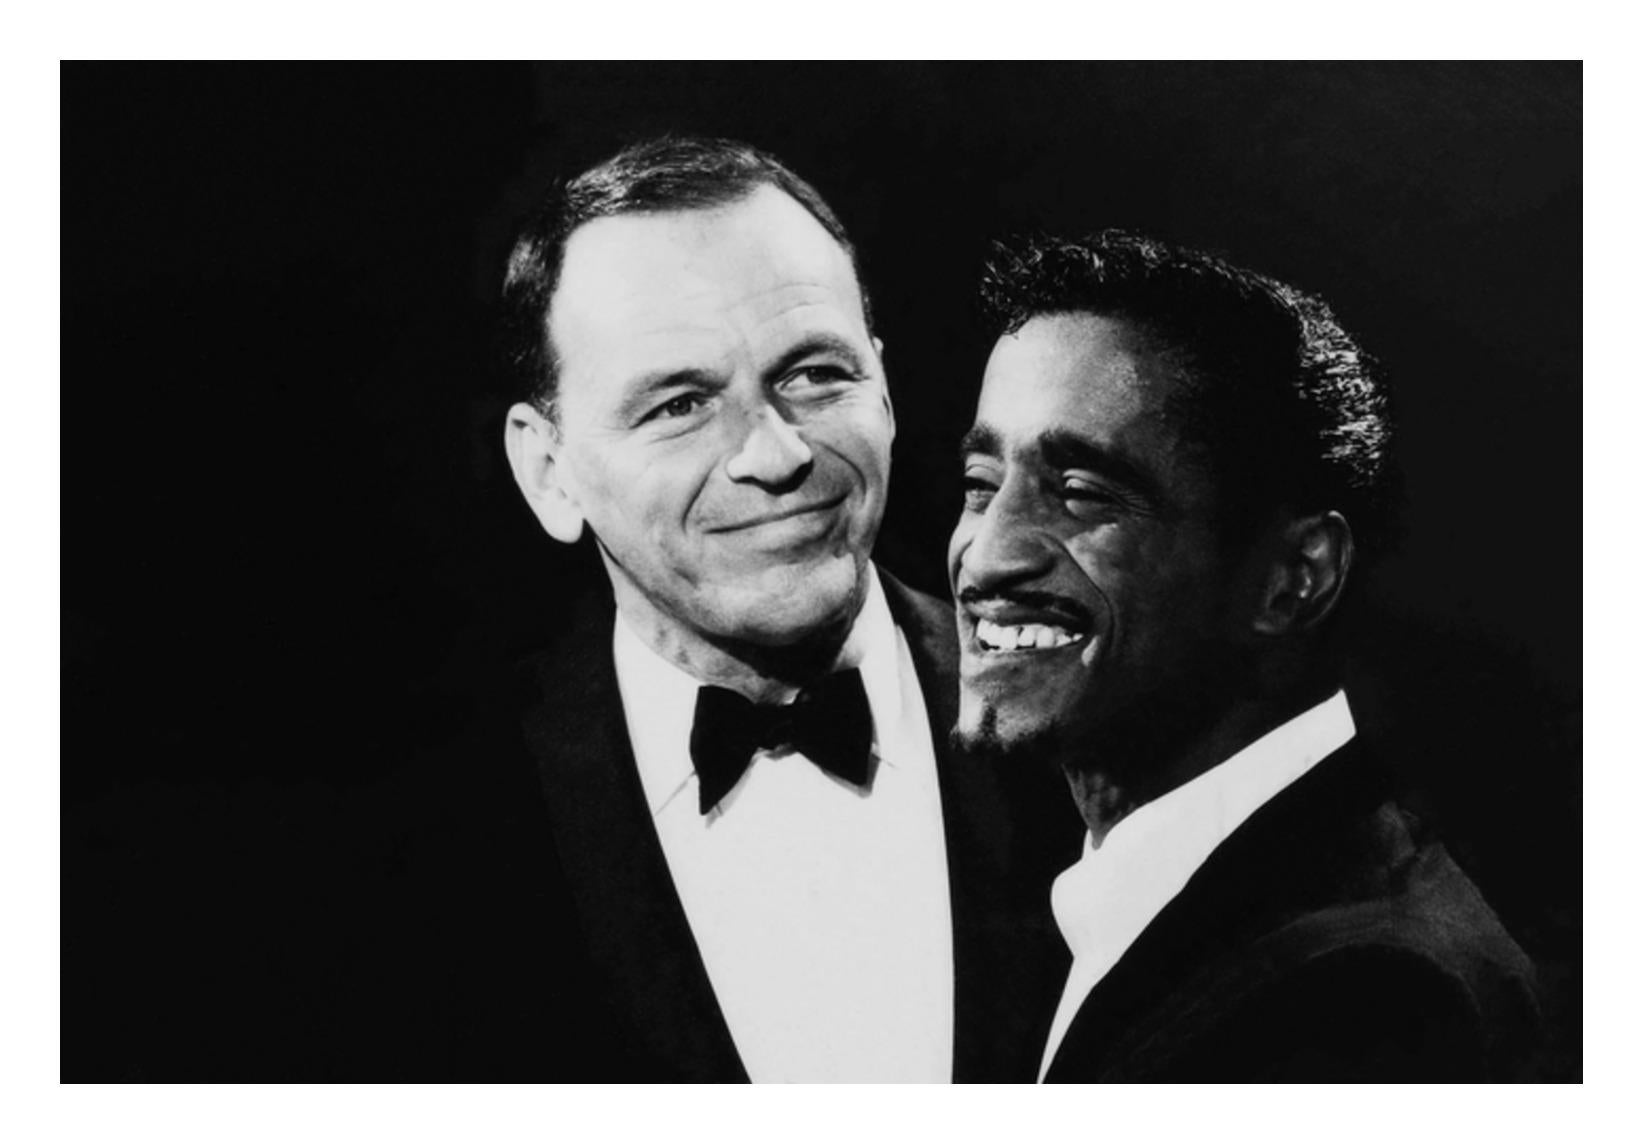 Frank Sinatra and Sammy Davis Jr. Smiling - Photograph by Unknown